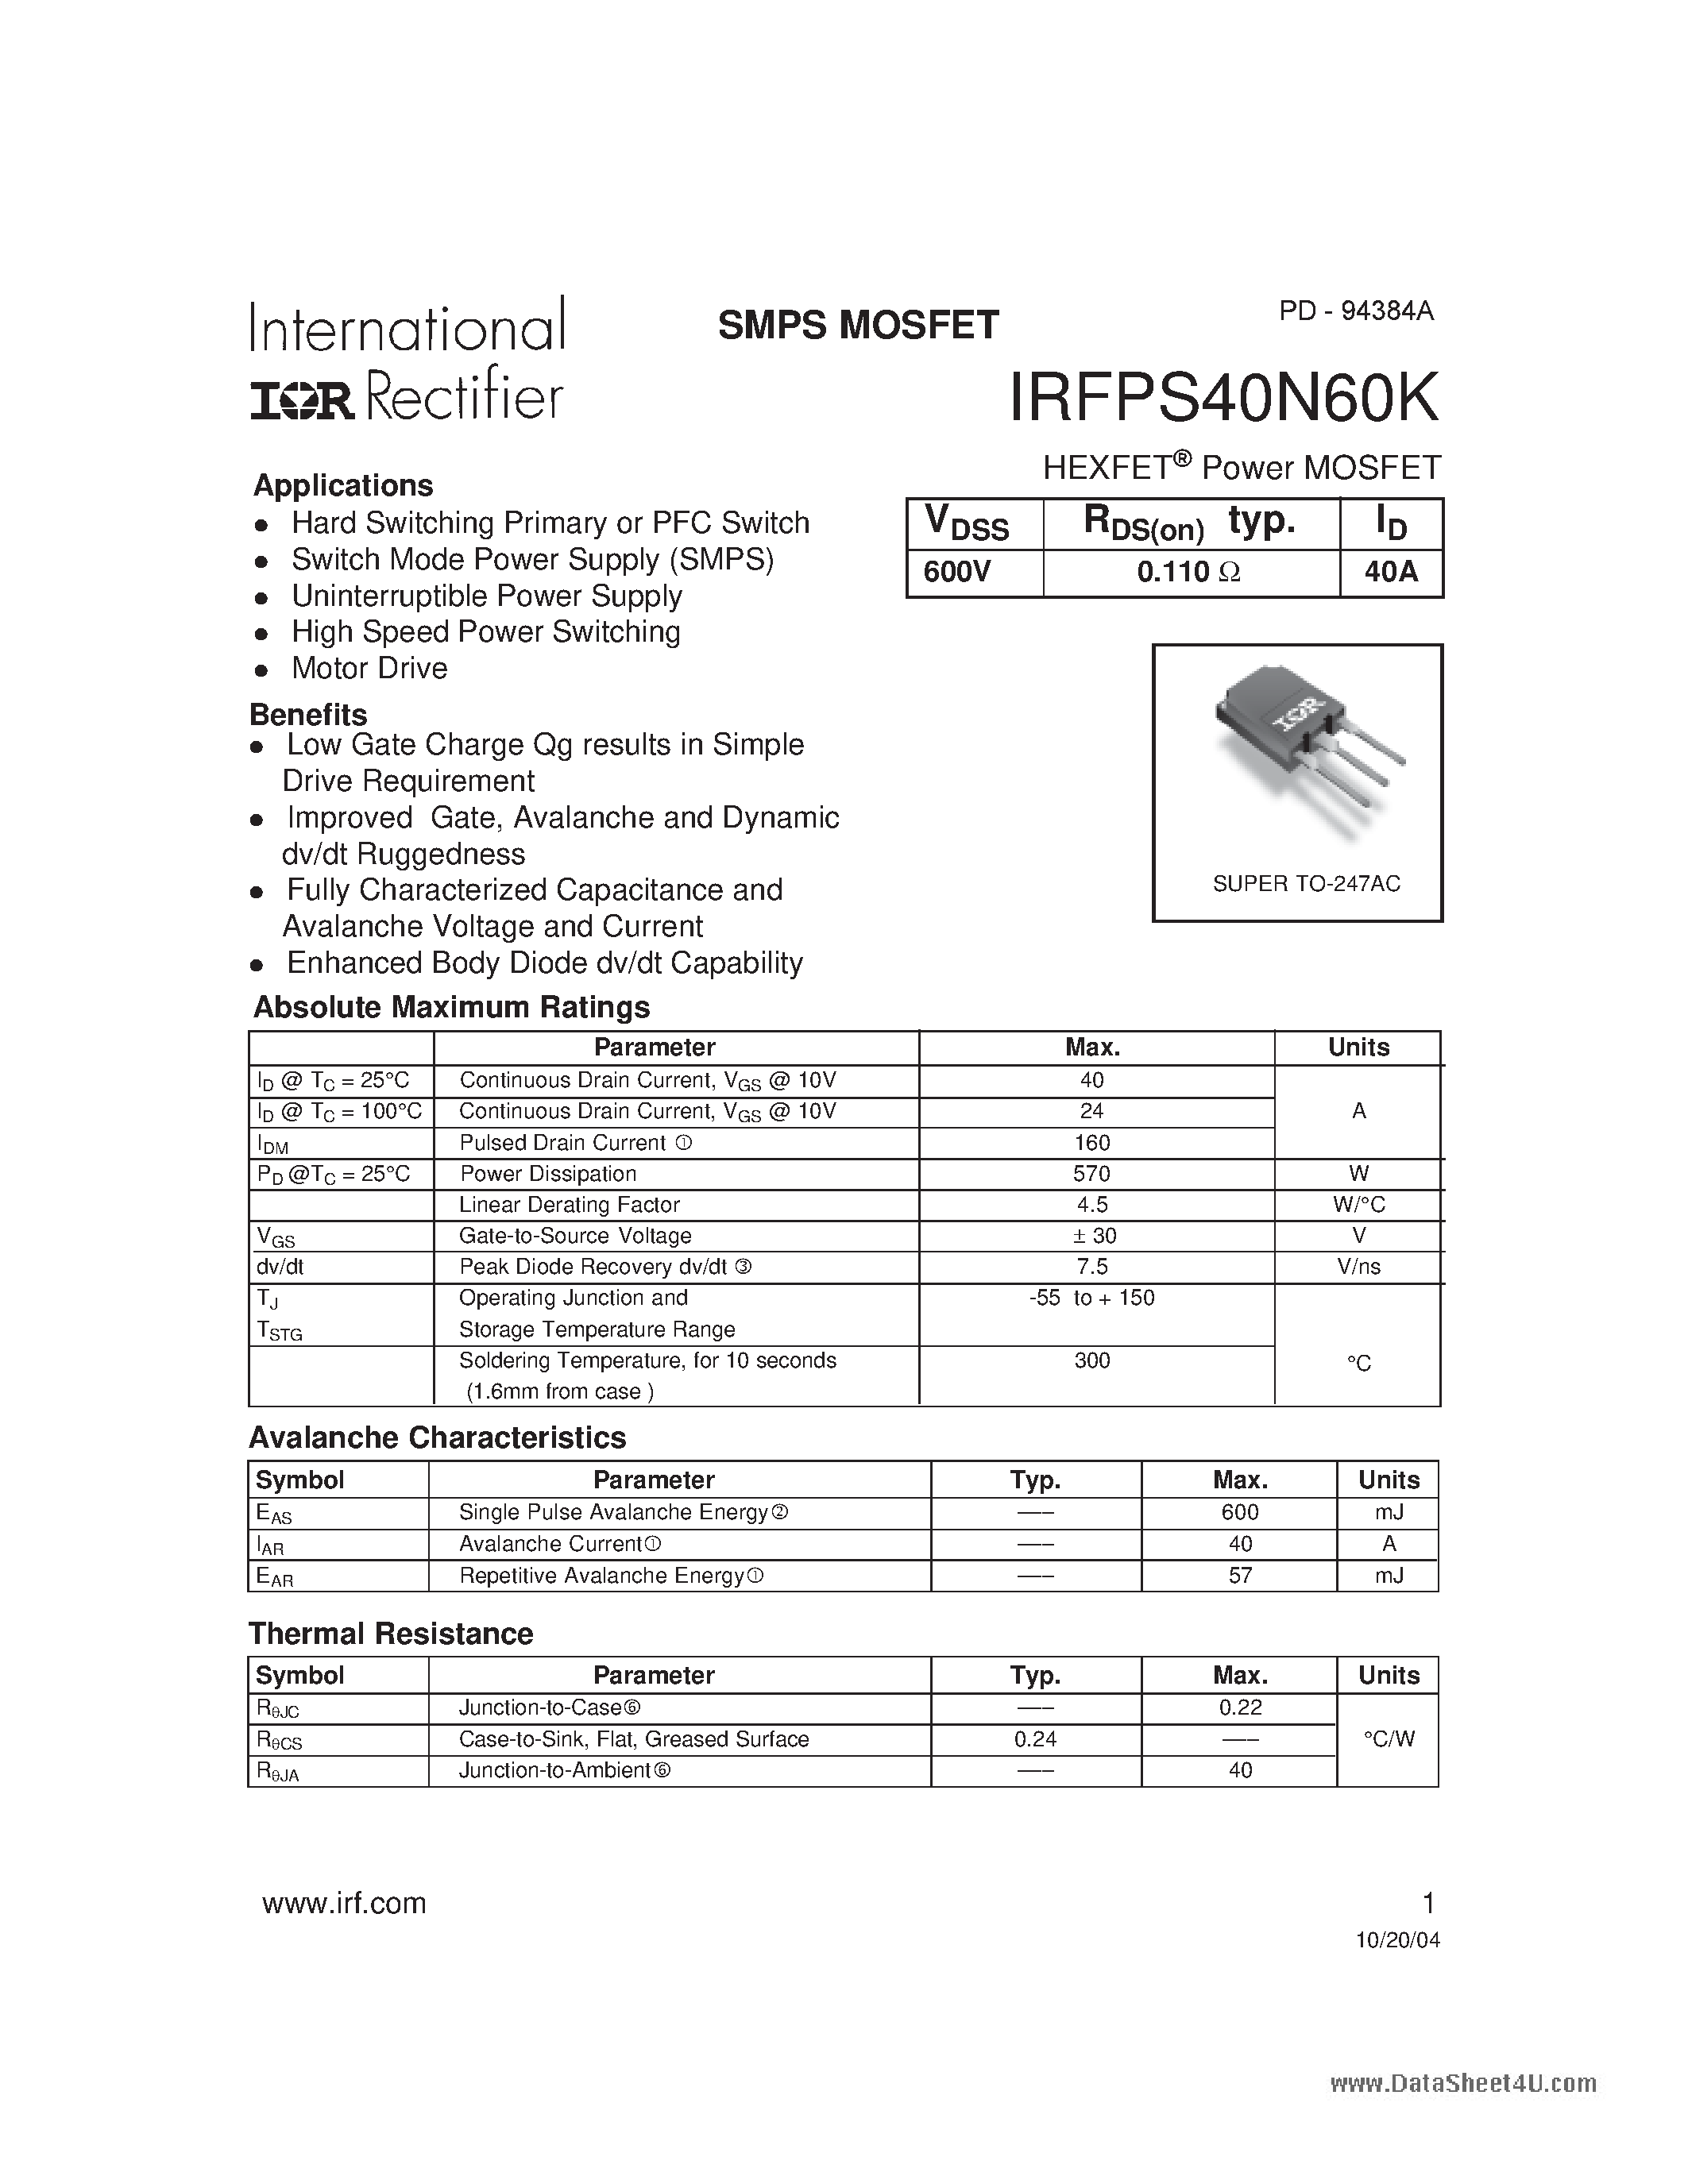 Даташит IRFPS40N60K - HEXFET Power MOSFET страница 1